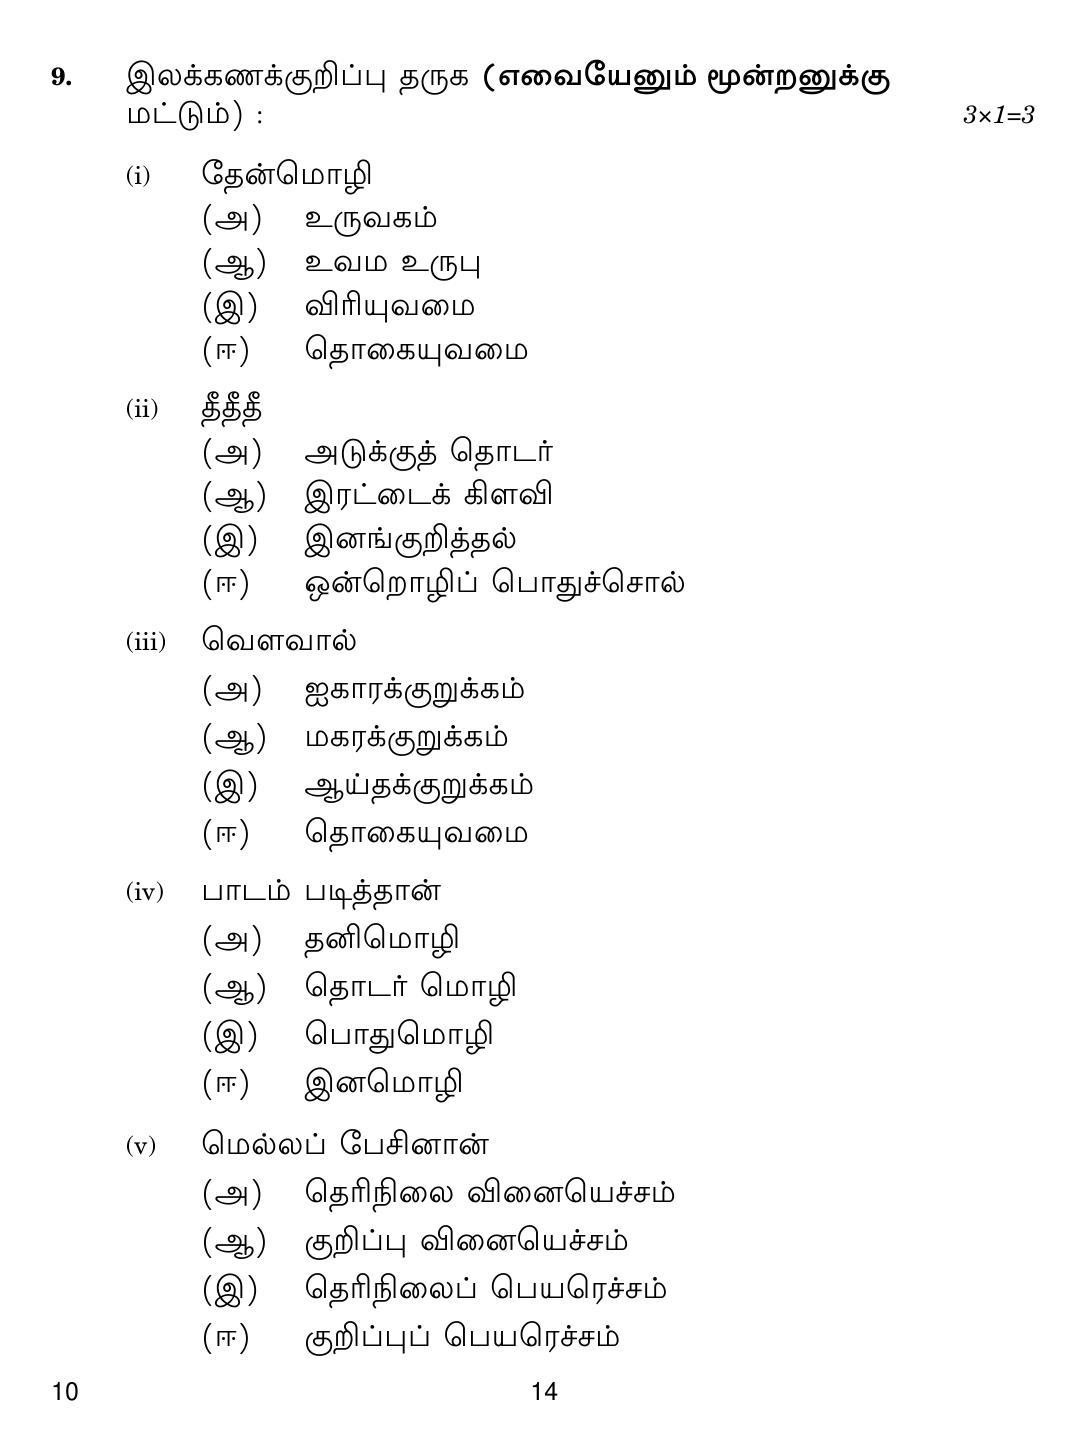 CBSE Class 10 10 Tamil 2019 Question Paper - Page 14